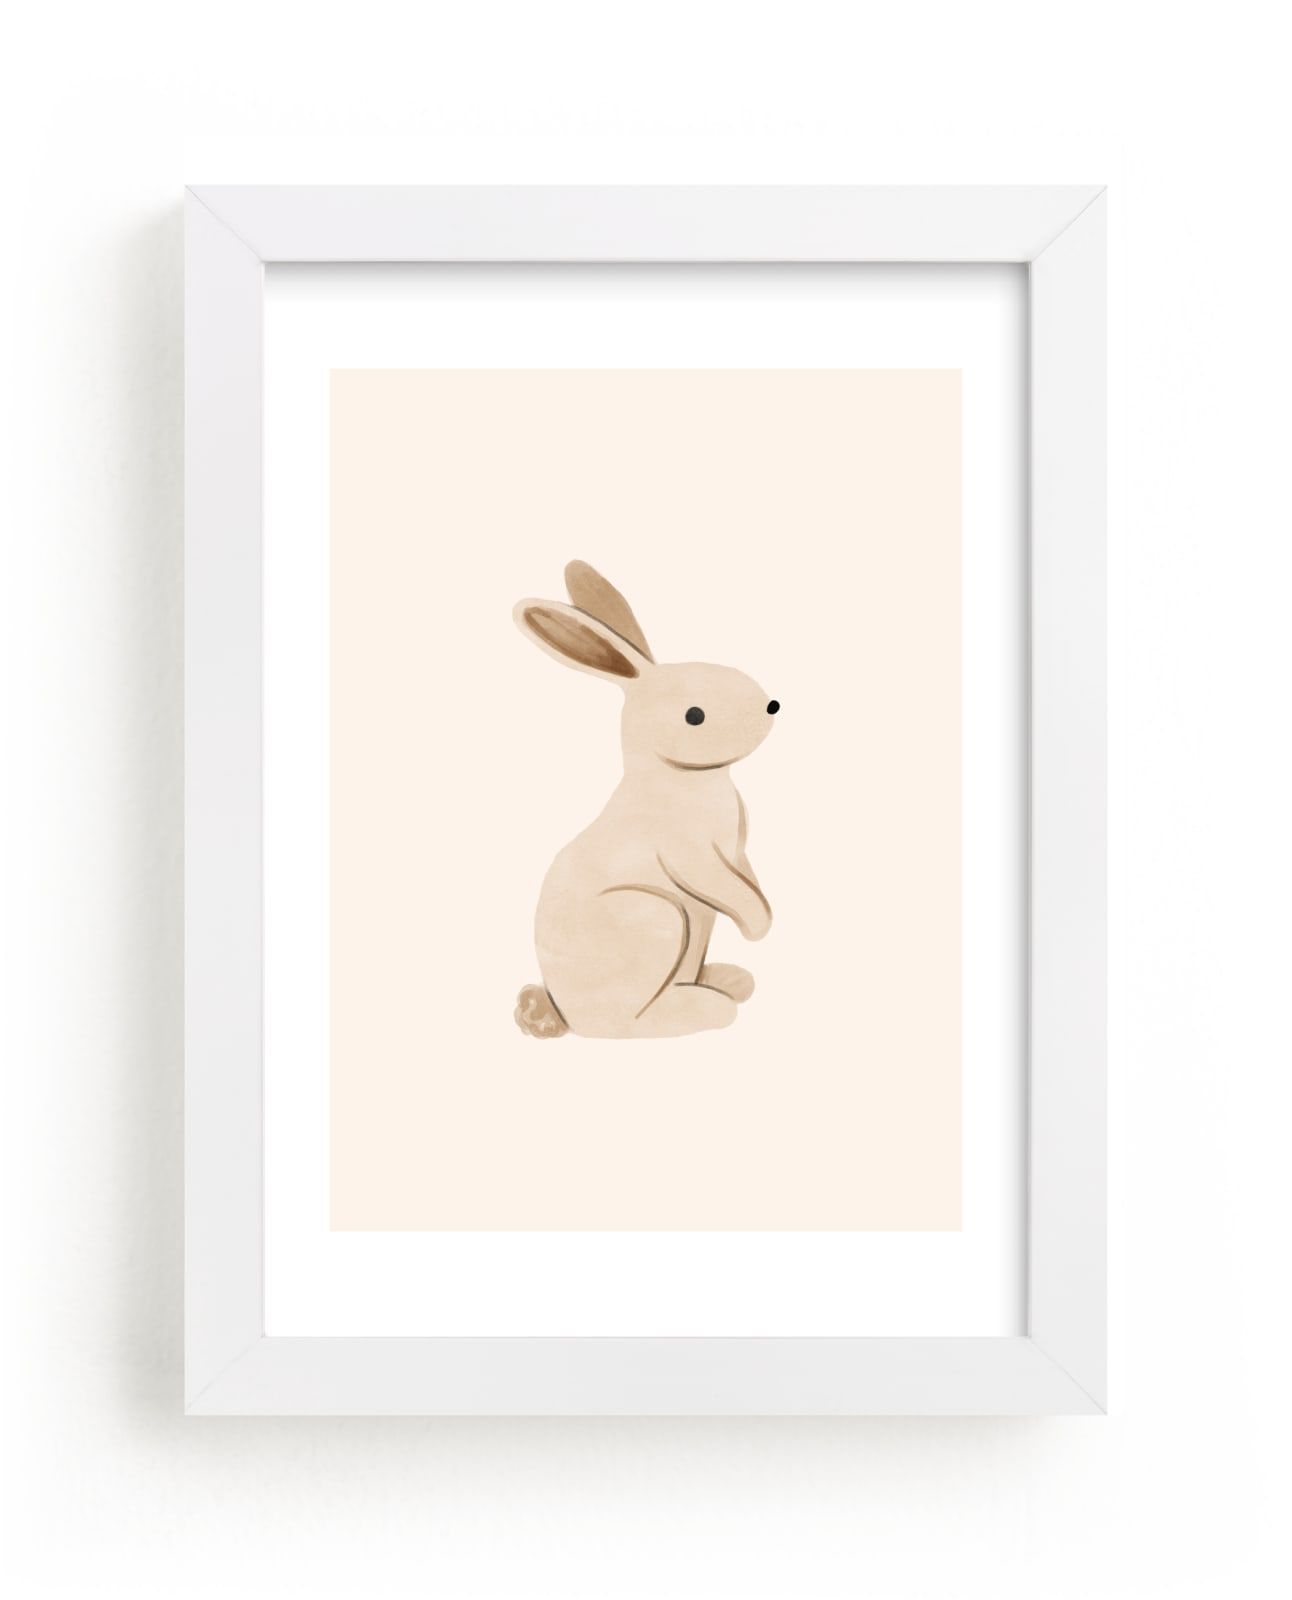 "Baby Rabbit" - Painting Limited Edition Art Print by Vivian Yiwing. | Minted